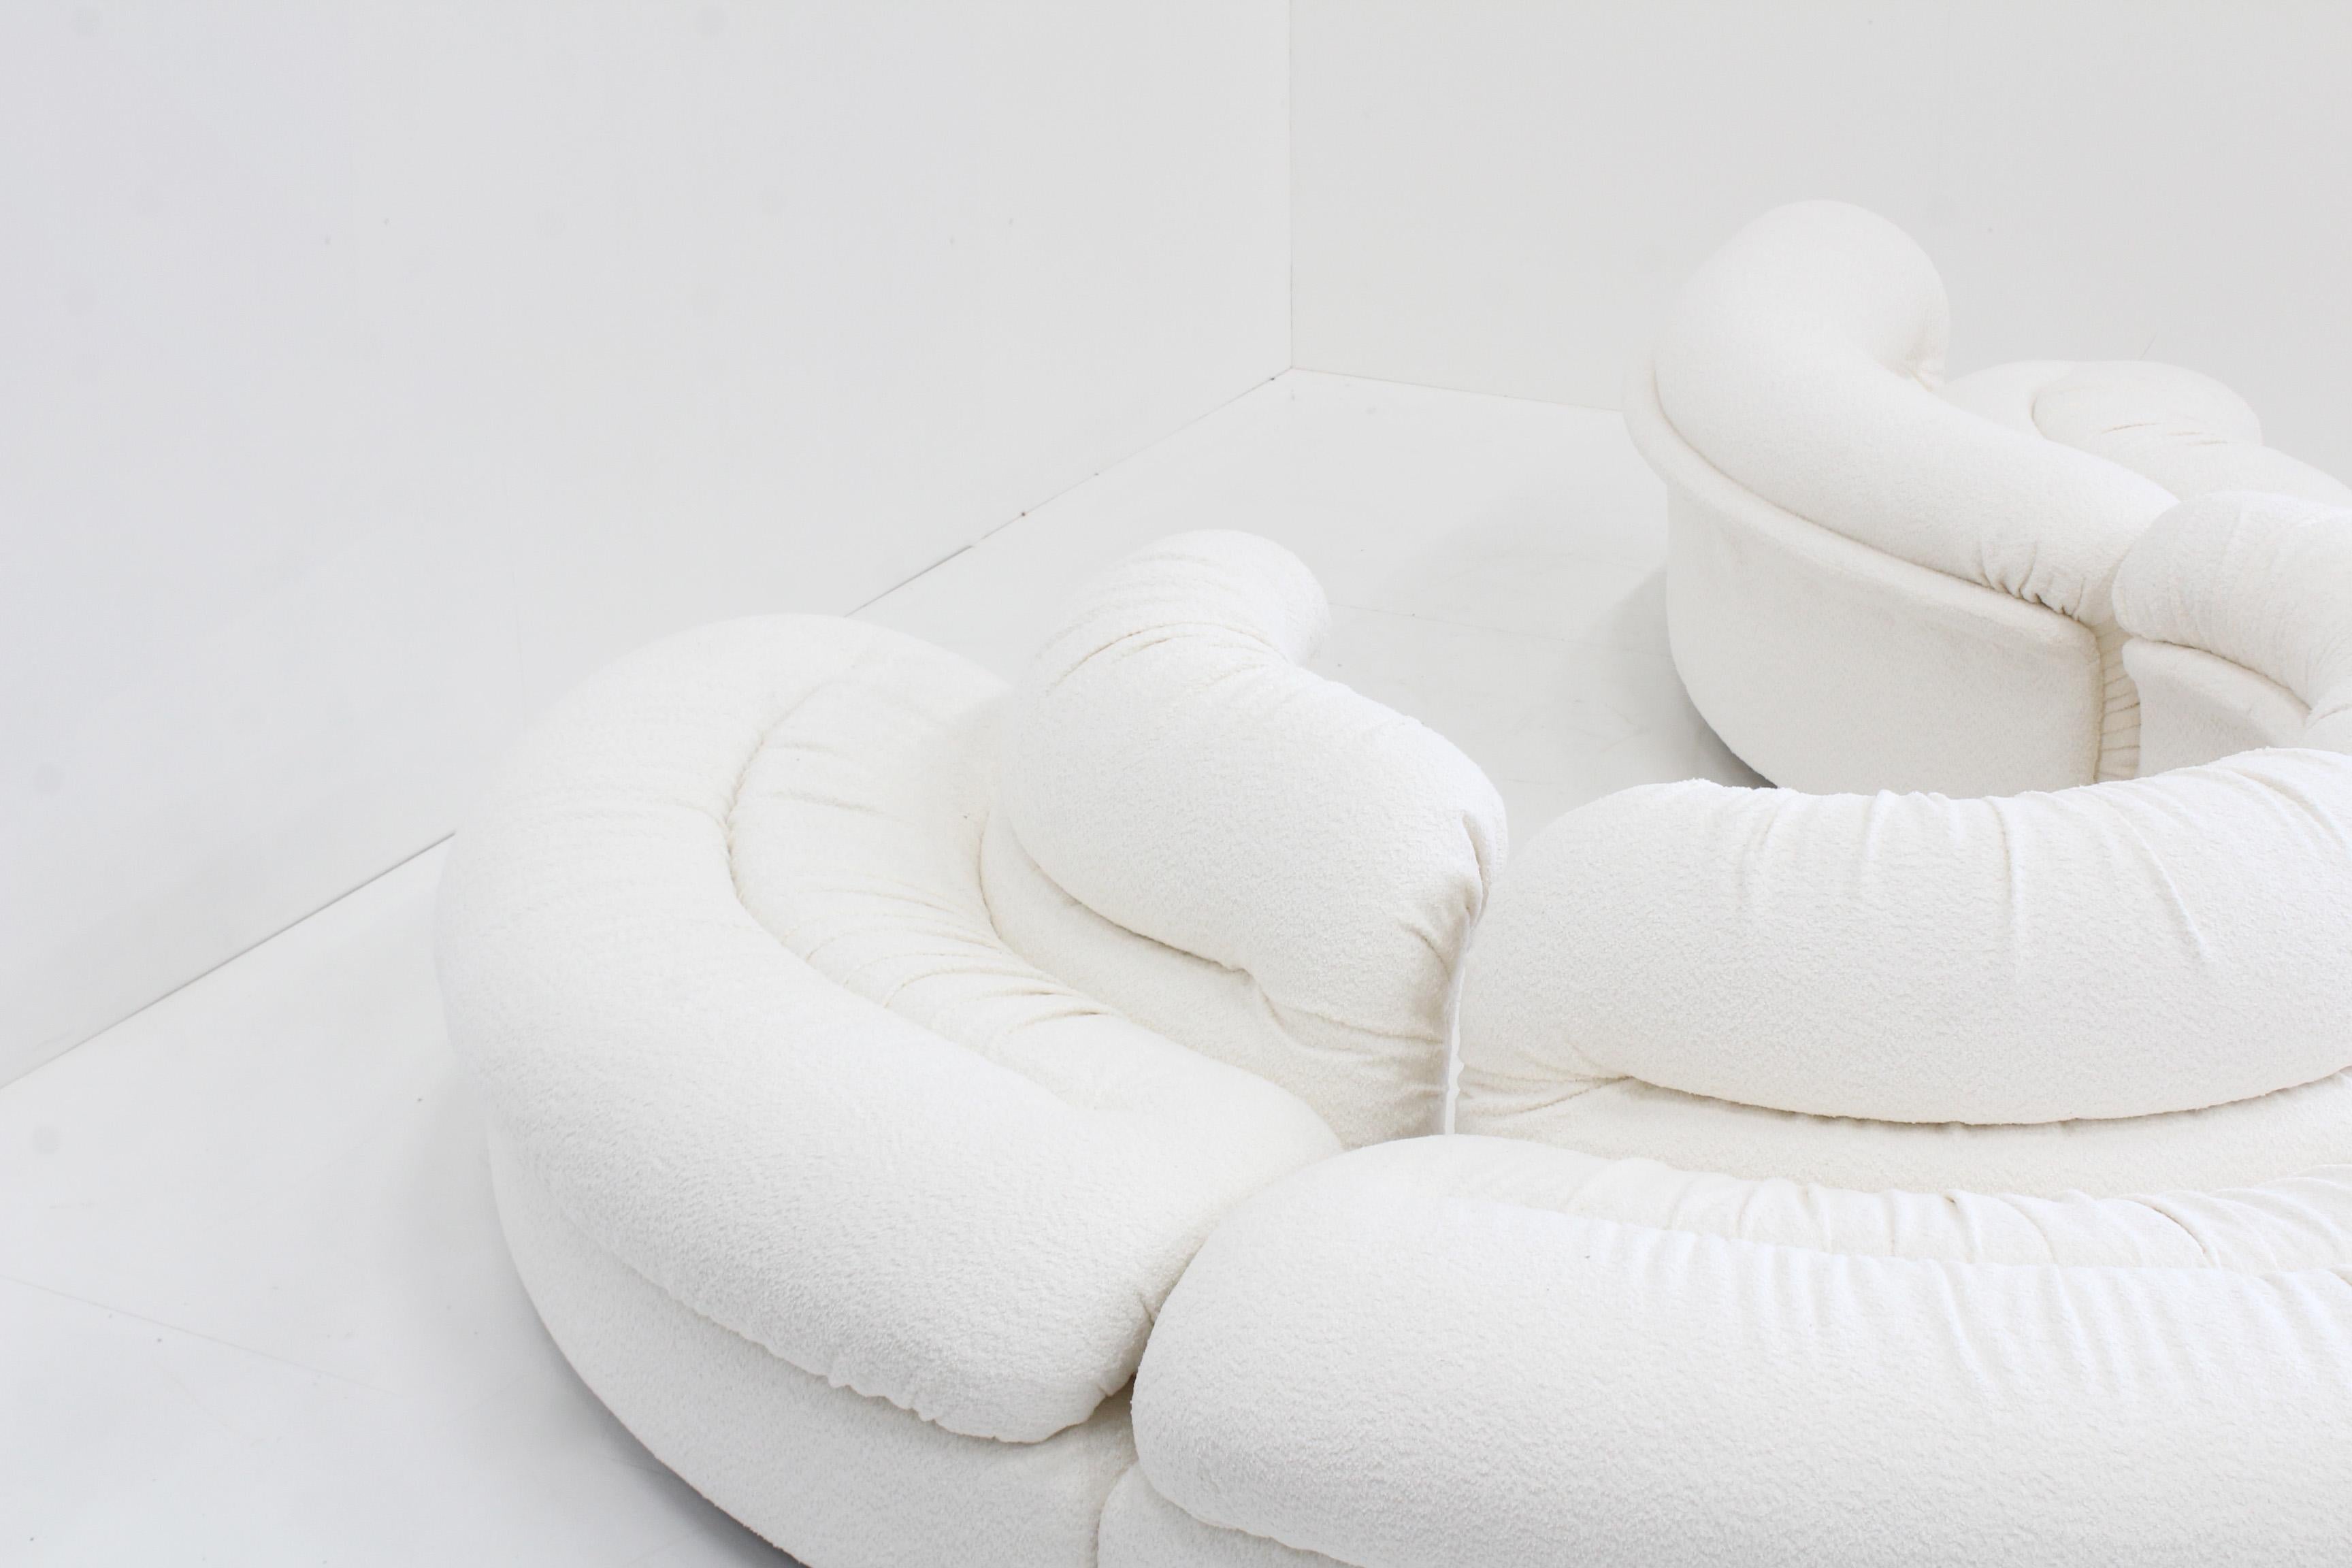 Tittina Ammannati and Vitelli Giampiero for Rossi di Albizzate, 'Grandangolo' sectional sofa, Italy, design from 1969. An icon of postmodern design, this 1960s curved modular sofa has been reupholstered in white boucle and is in excellent